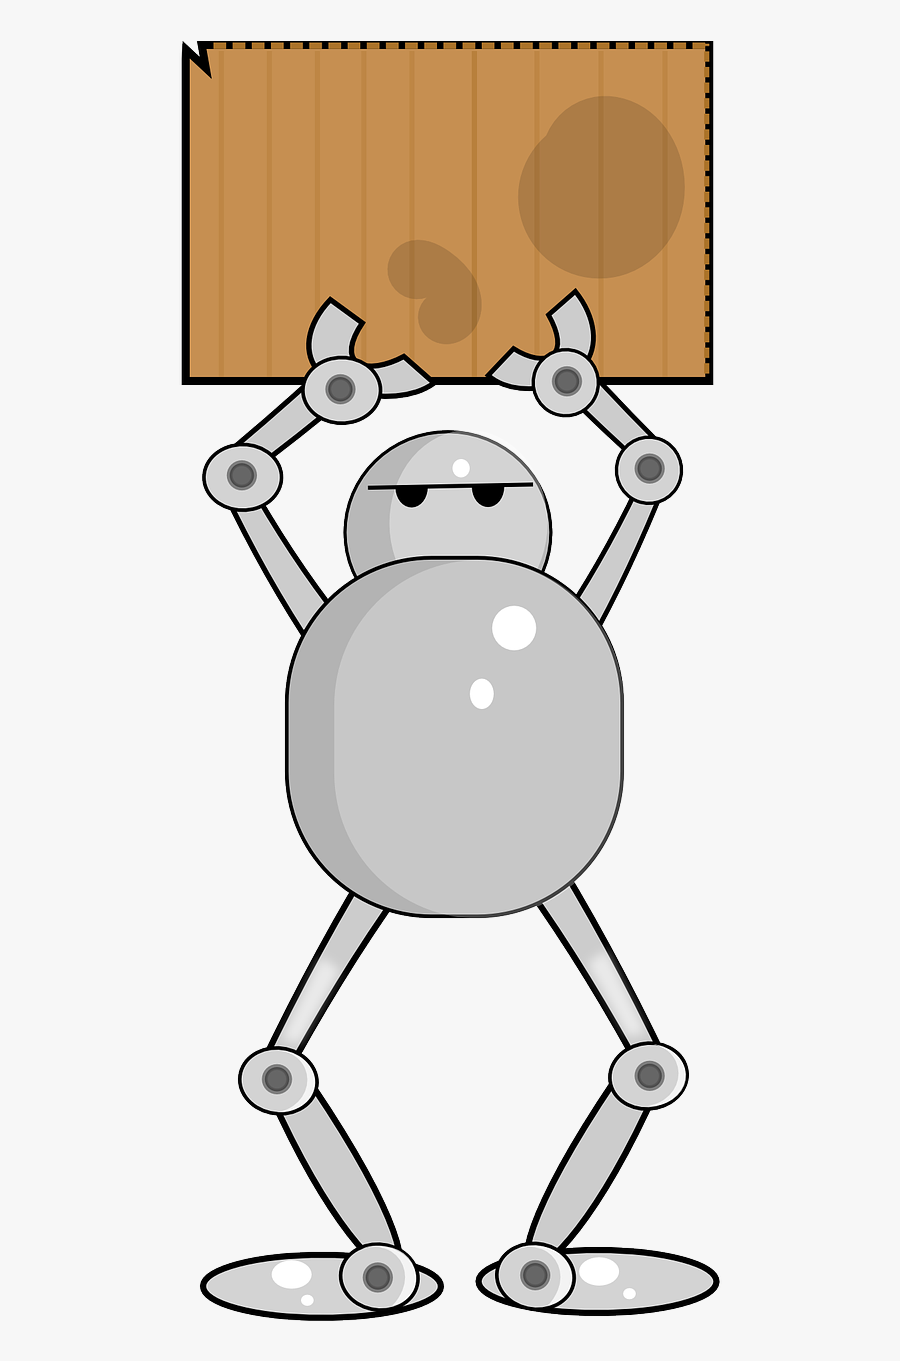 Android Robot Protest - Robot With Hands Up, Transparent Clipart